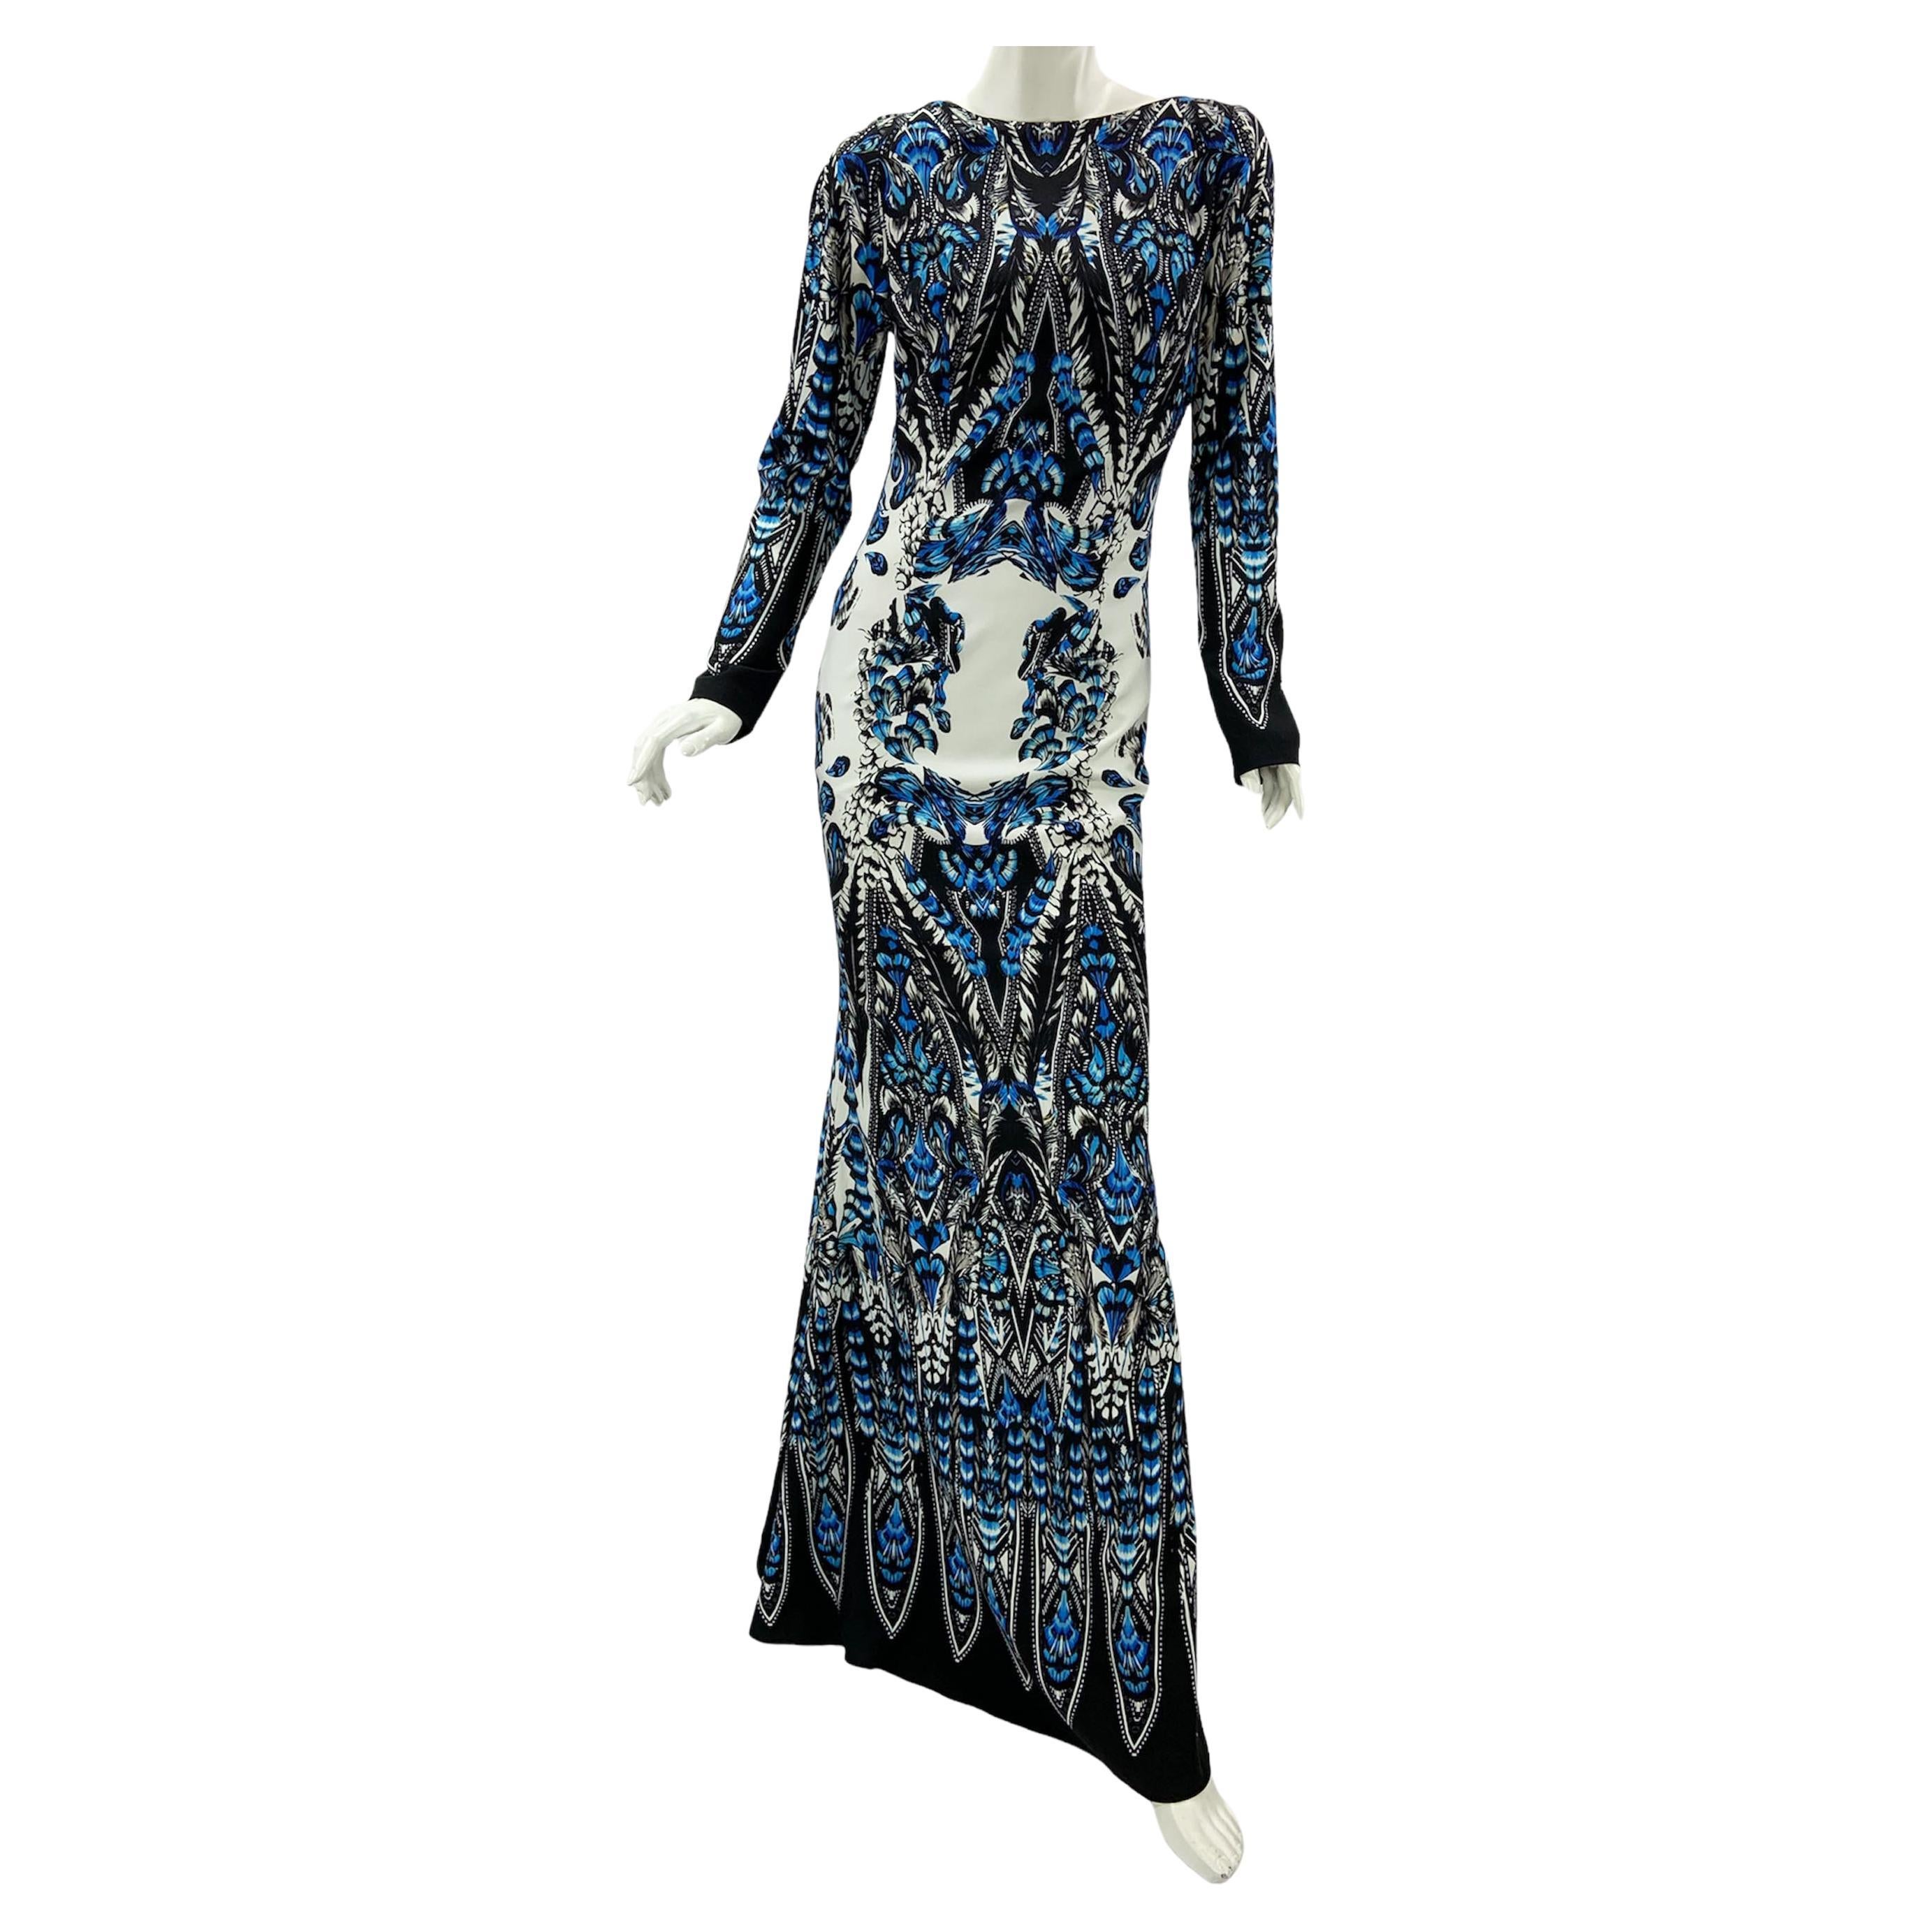 New Roberto Cavalli Feather Print Blue White Dress Gown Italian 36 For Sale